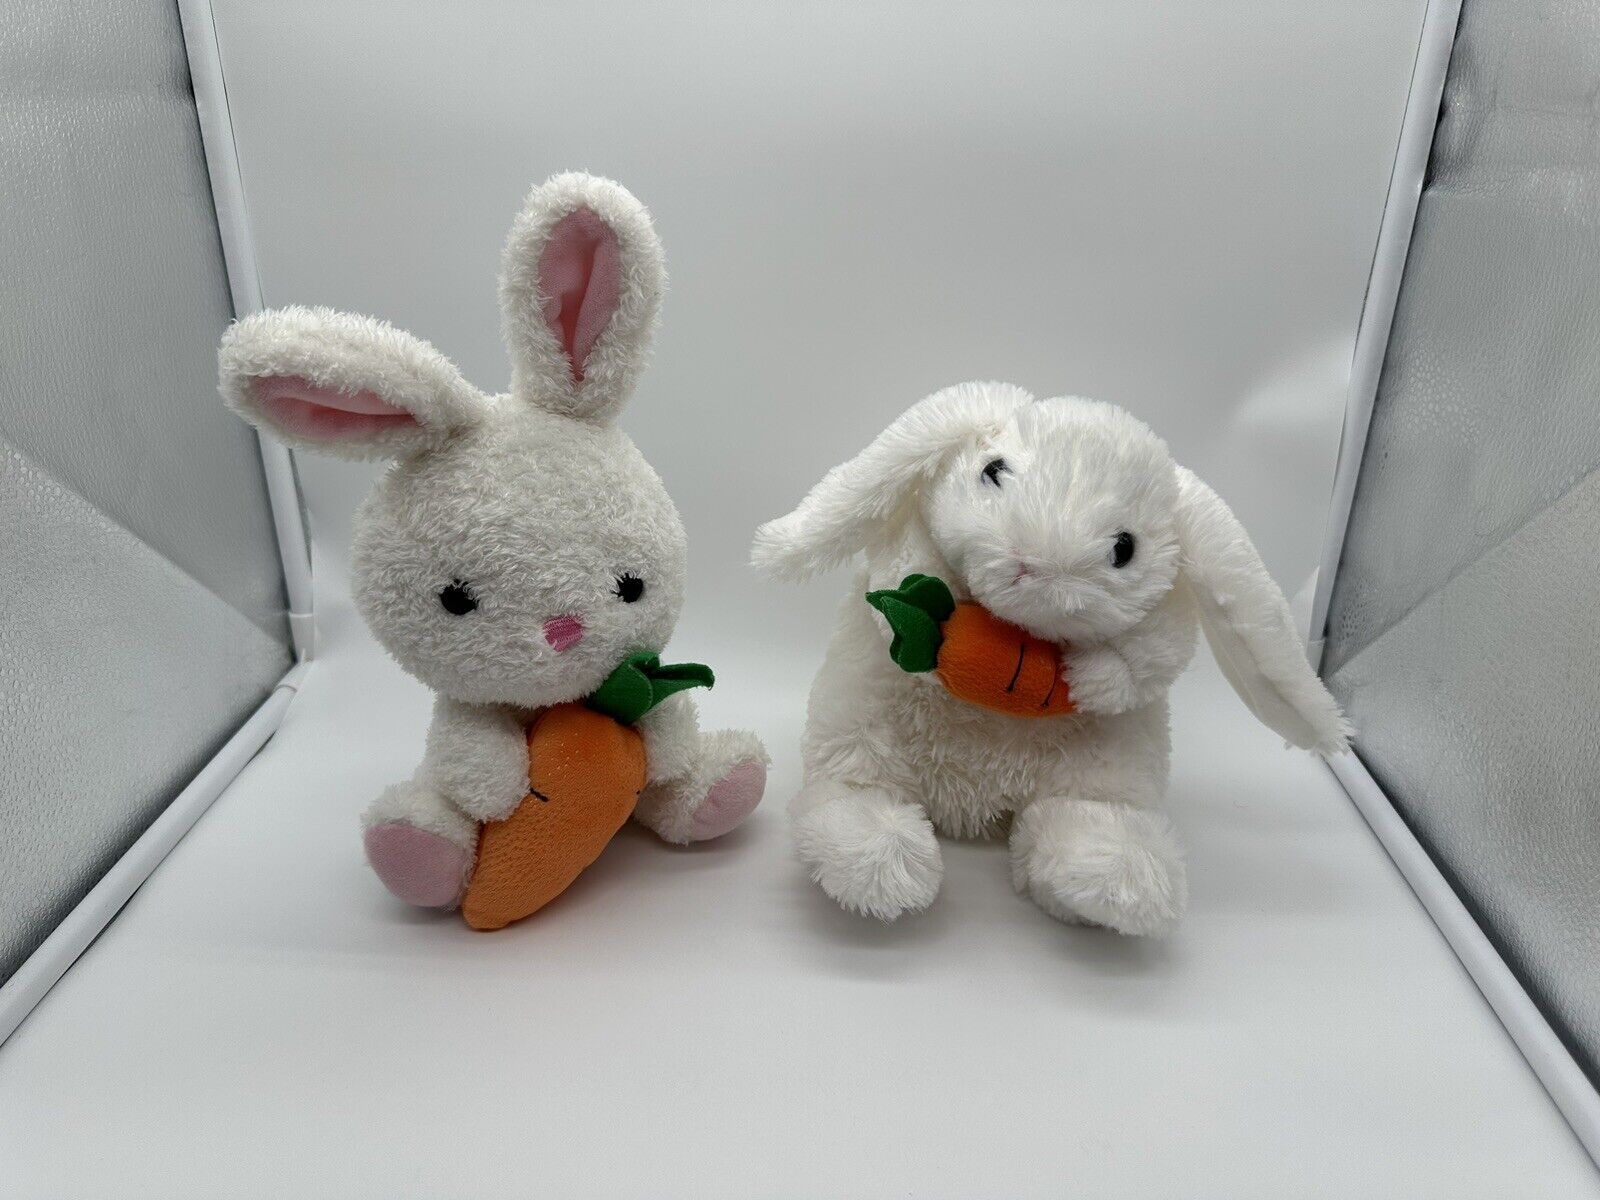 Plush vintage easter bunnies, Holding carrots